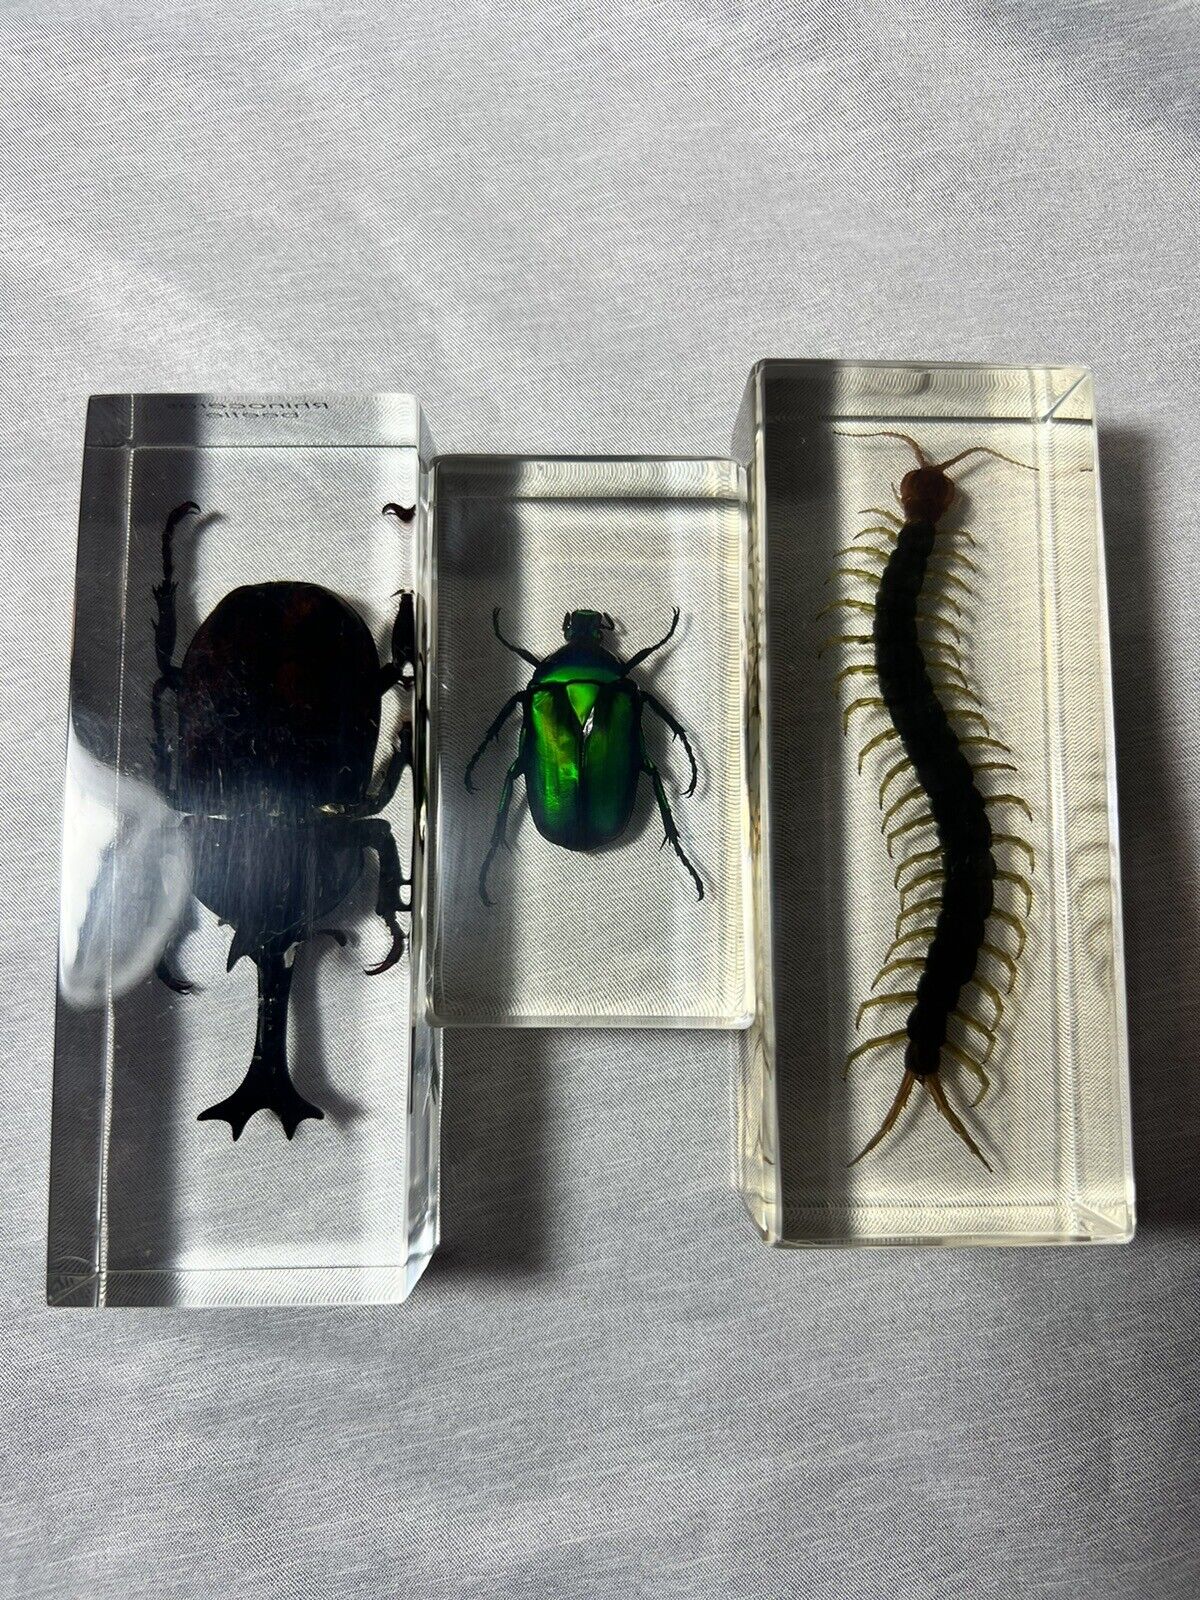 Insects-beetles And Centipede In Clear Blocks